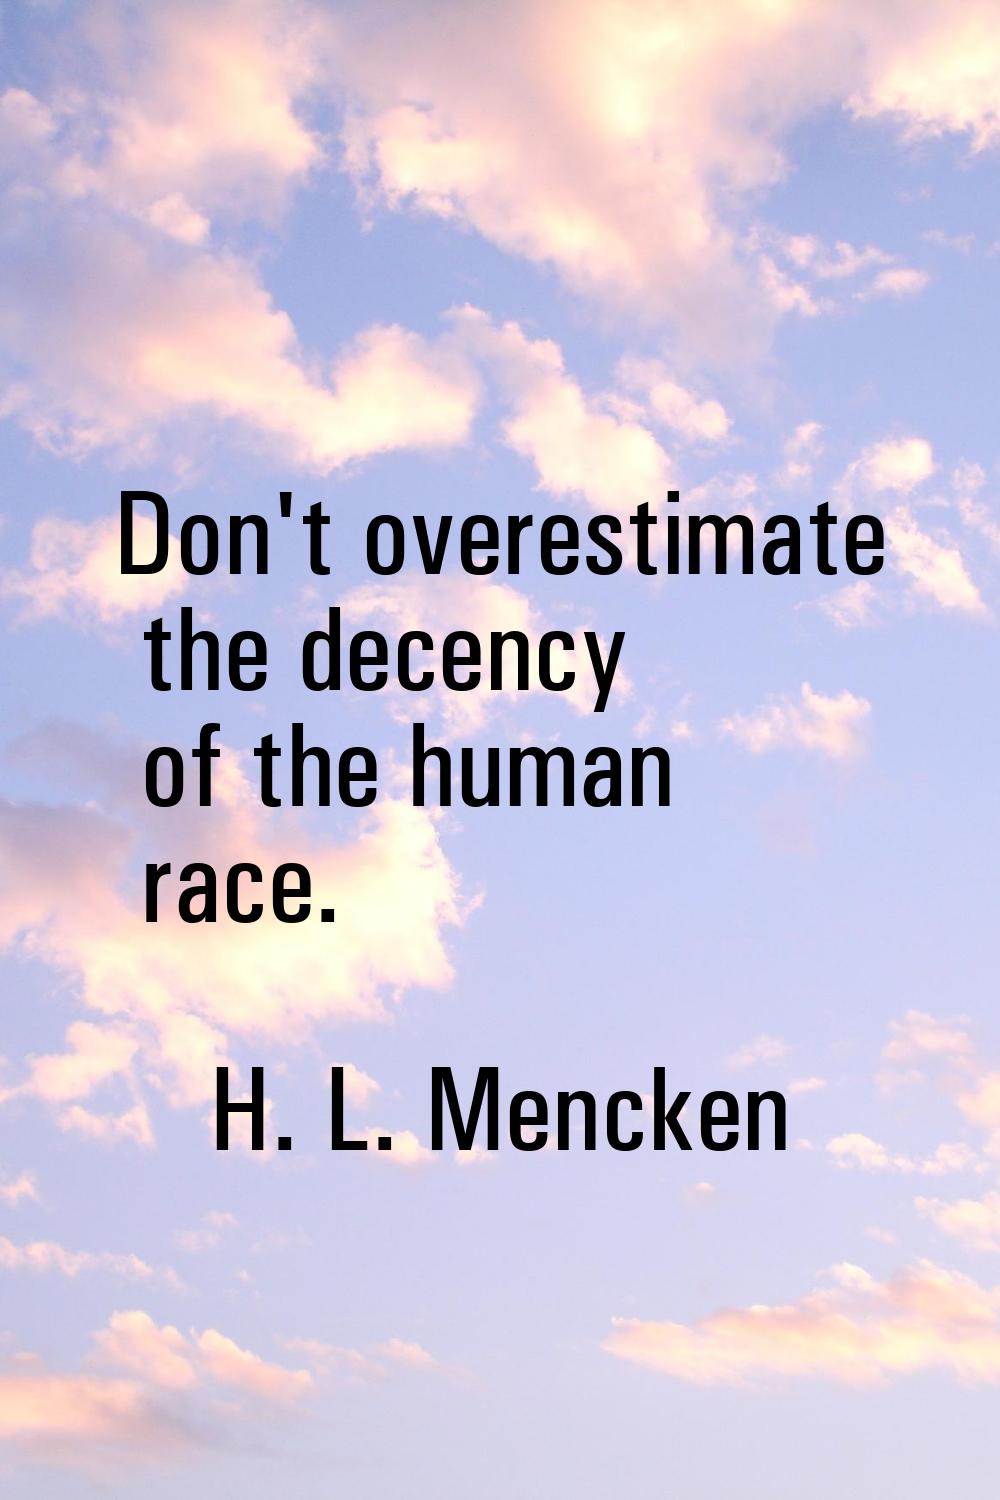 Don't overestimate the decency of the human race.